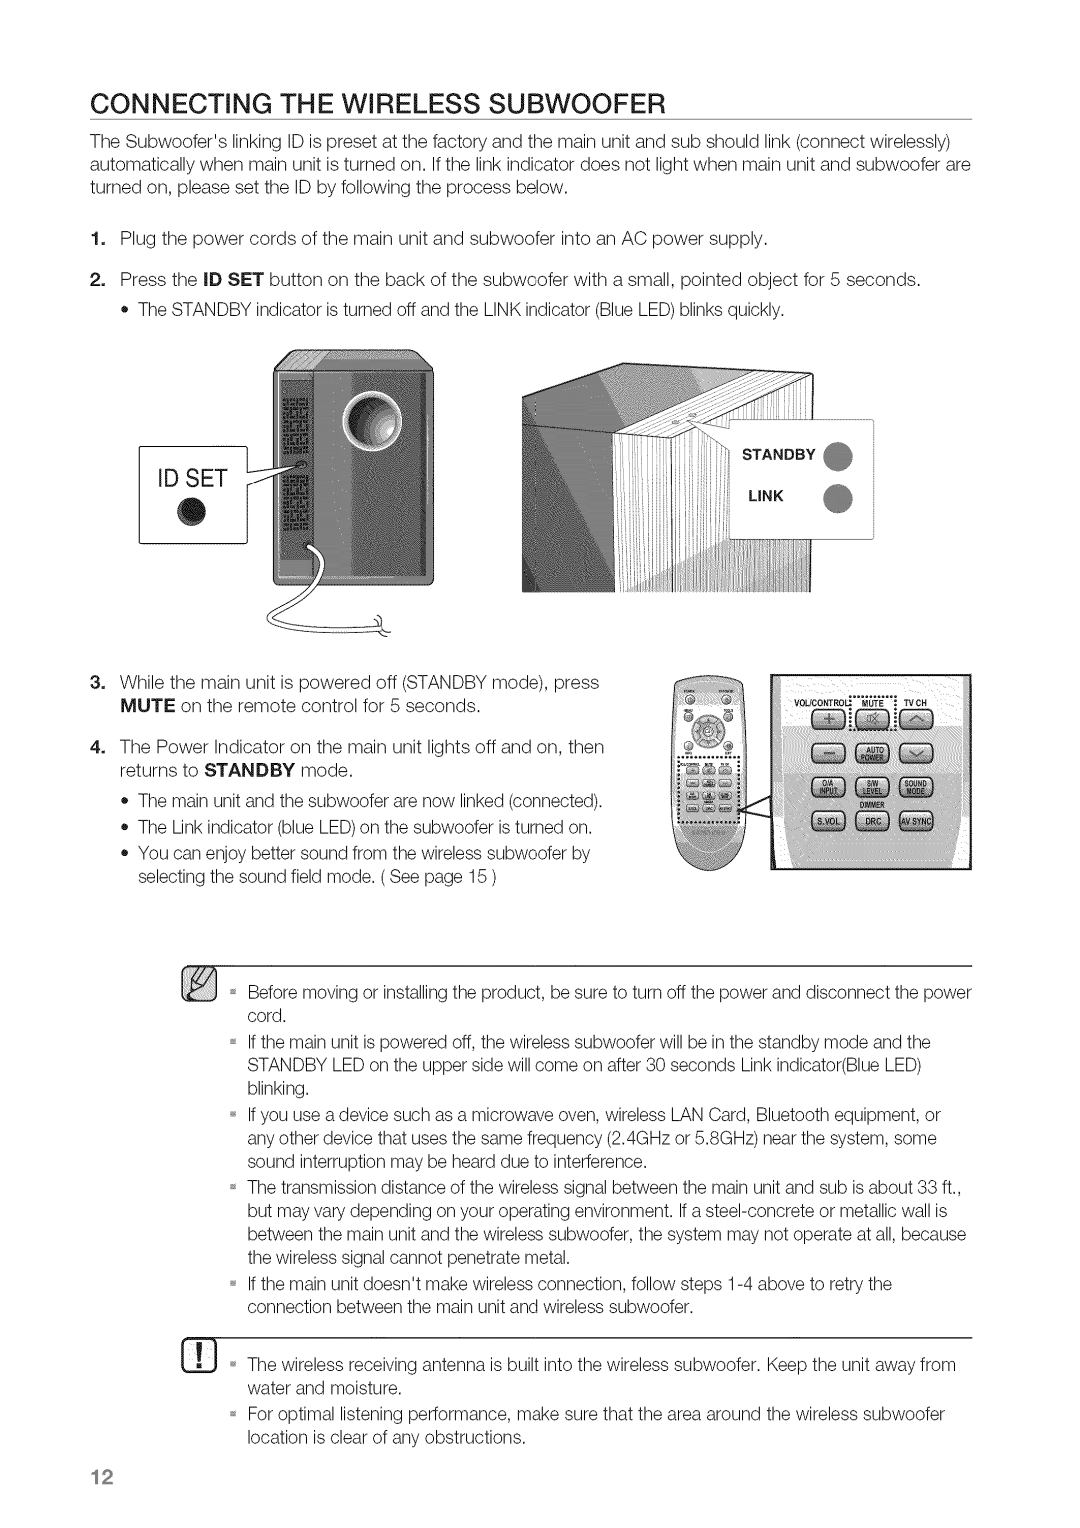 Samsung HW-C450 manual Connecting The Wireless Subwoofer, Standby @ Link 